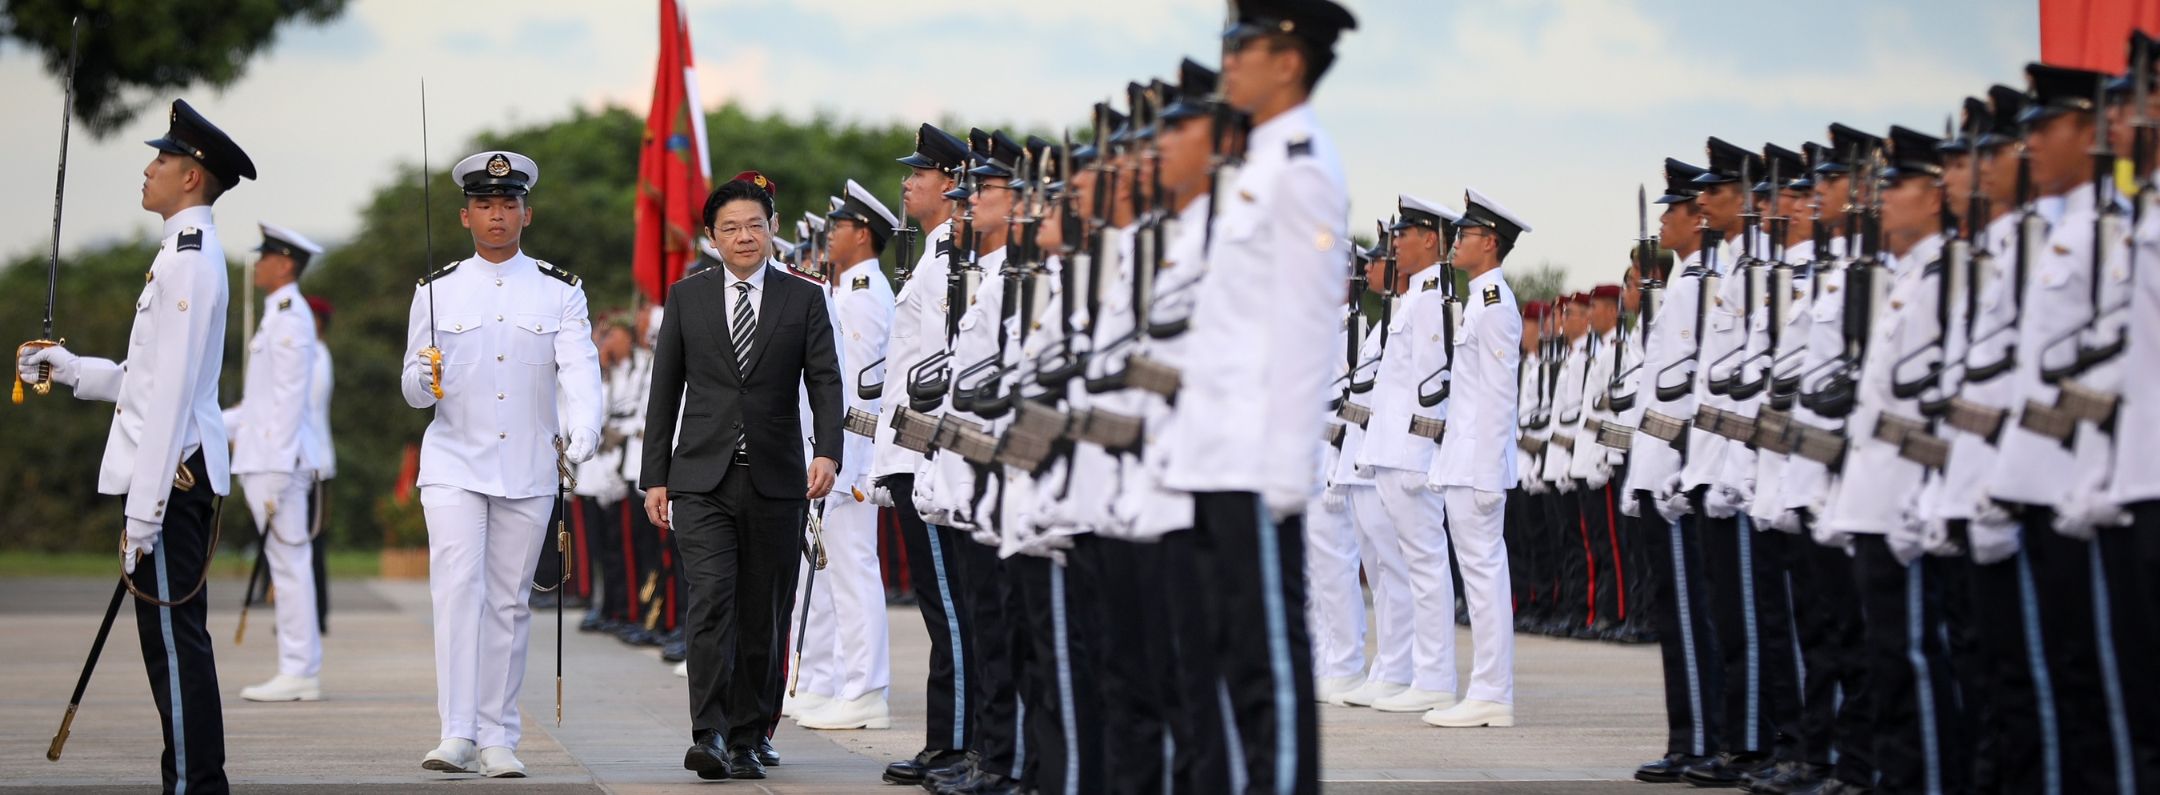 22 Officer Cadet Commissioning Parade at SAFTI Military Institute_Hero jpg